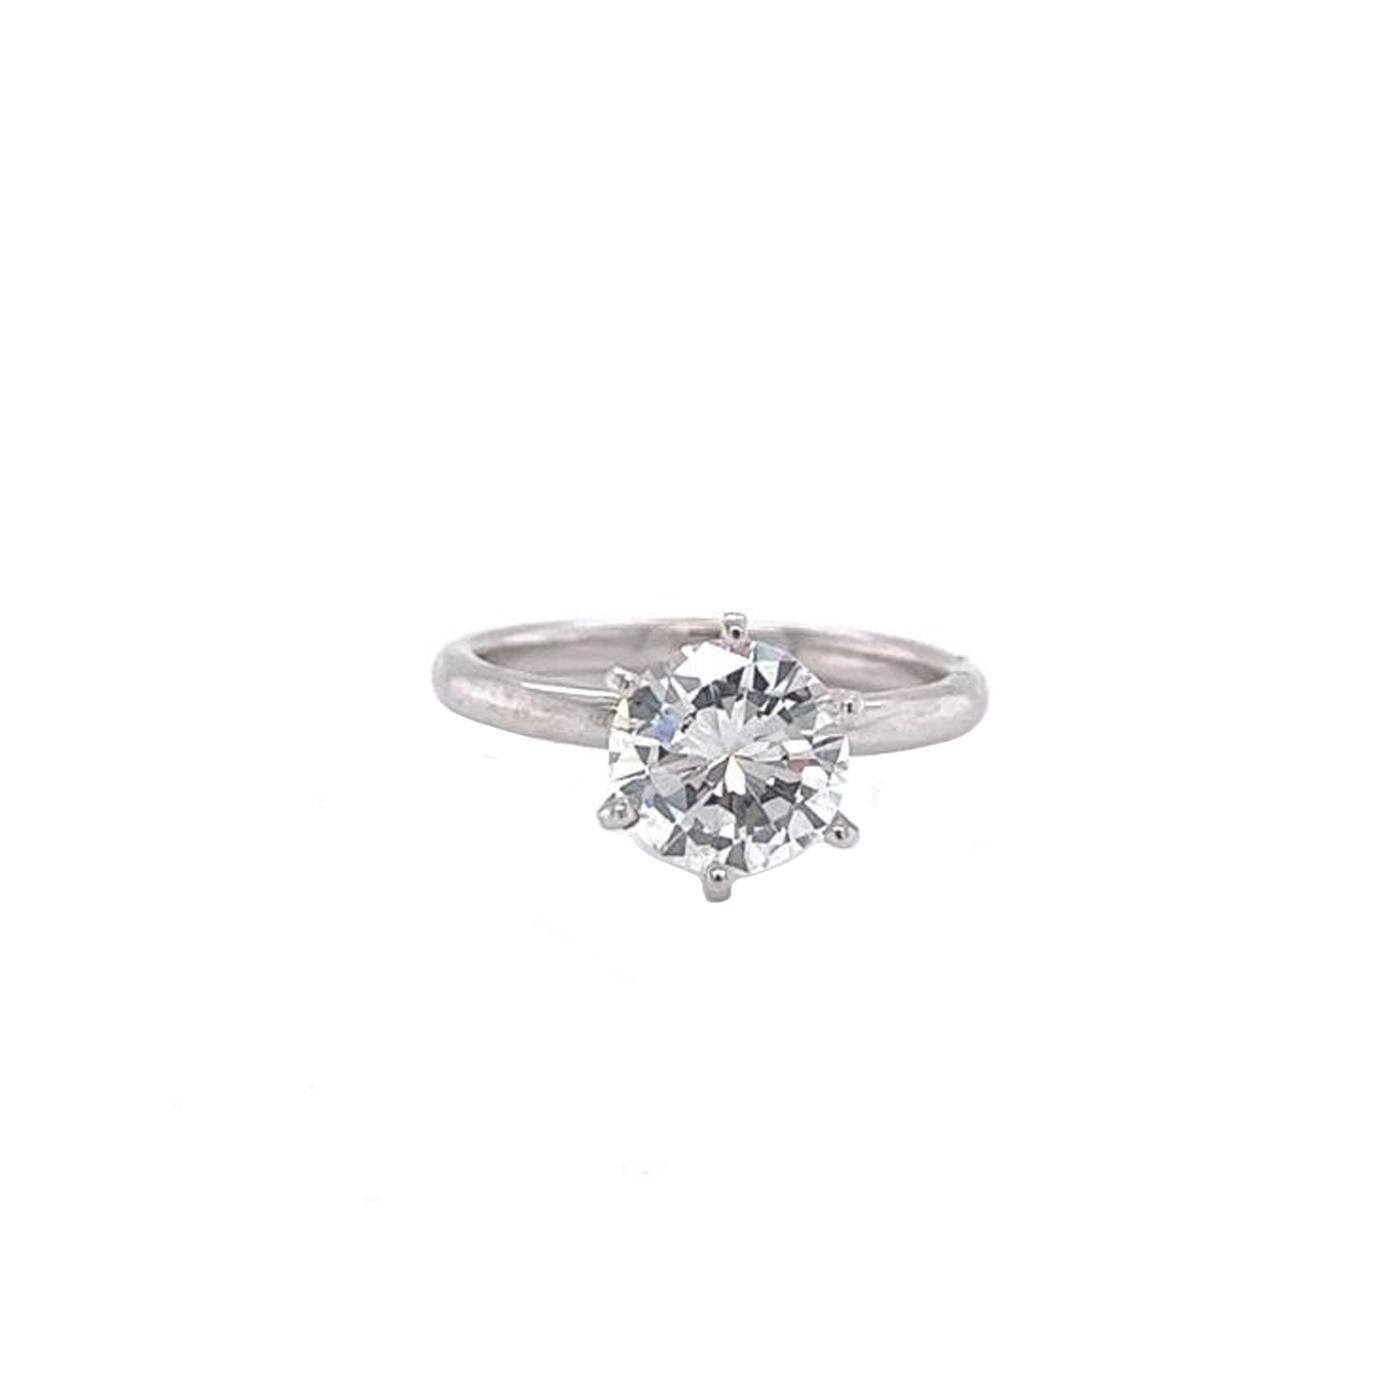 Taille brillant GIA Certified 1.25ct Solitaire Diamond Ring 14k Gold VS1 Clarity Natural H Color en vente